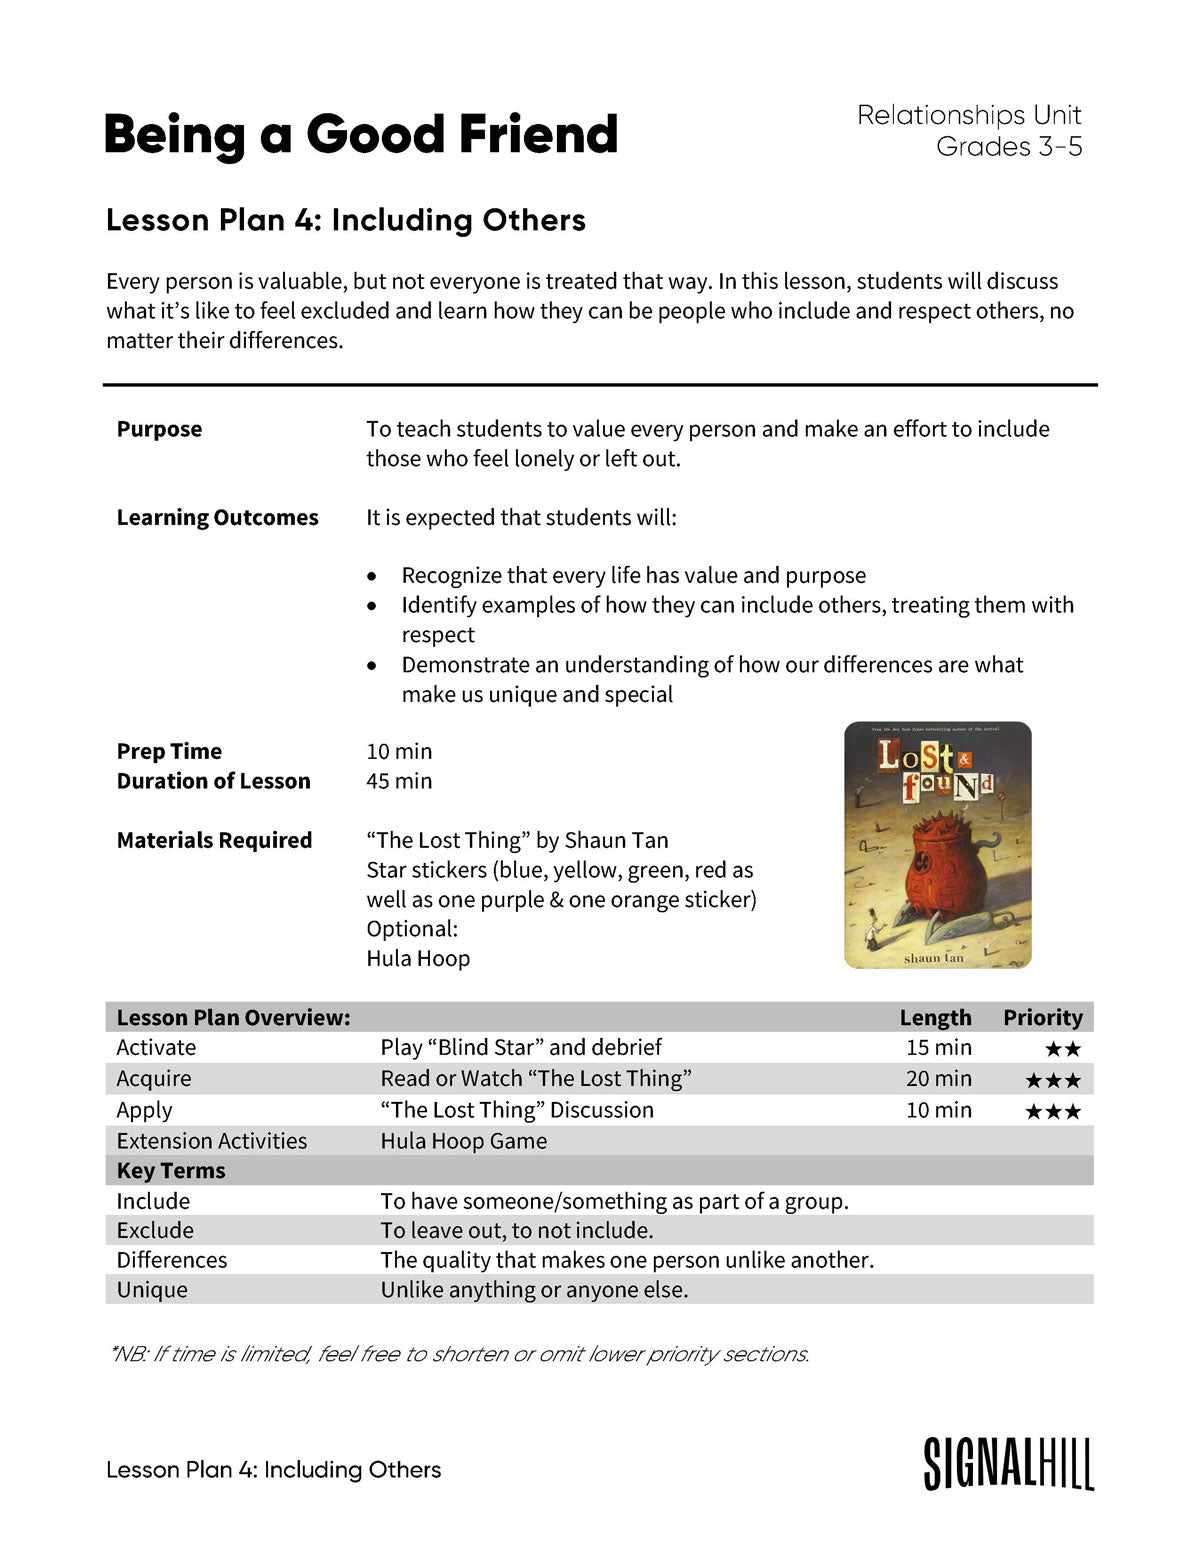 Lesson Plan 4: Including Others